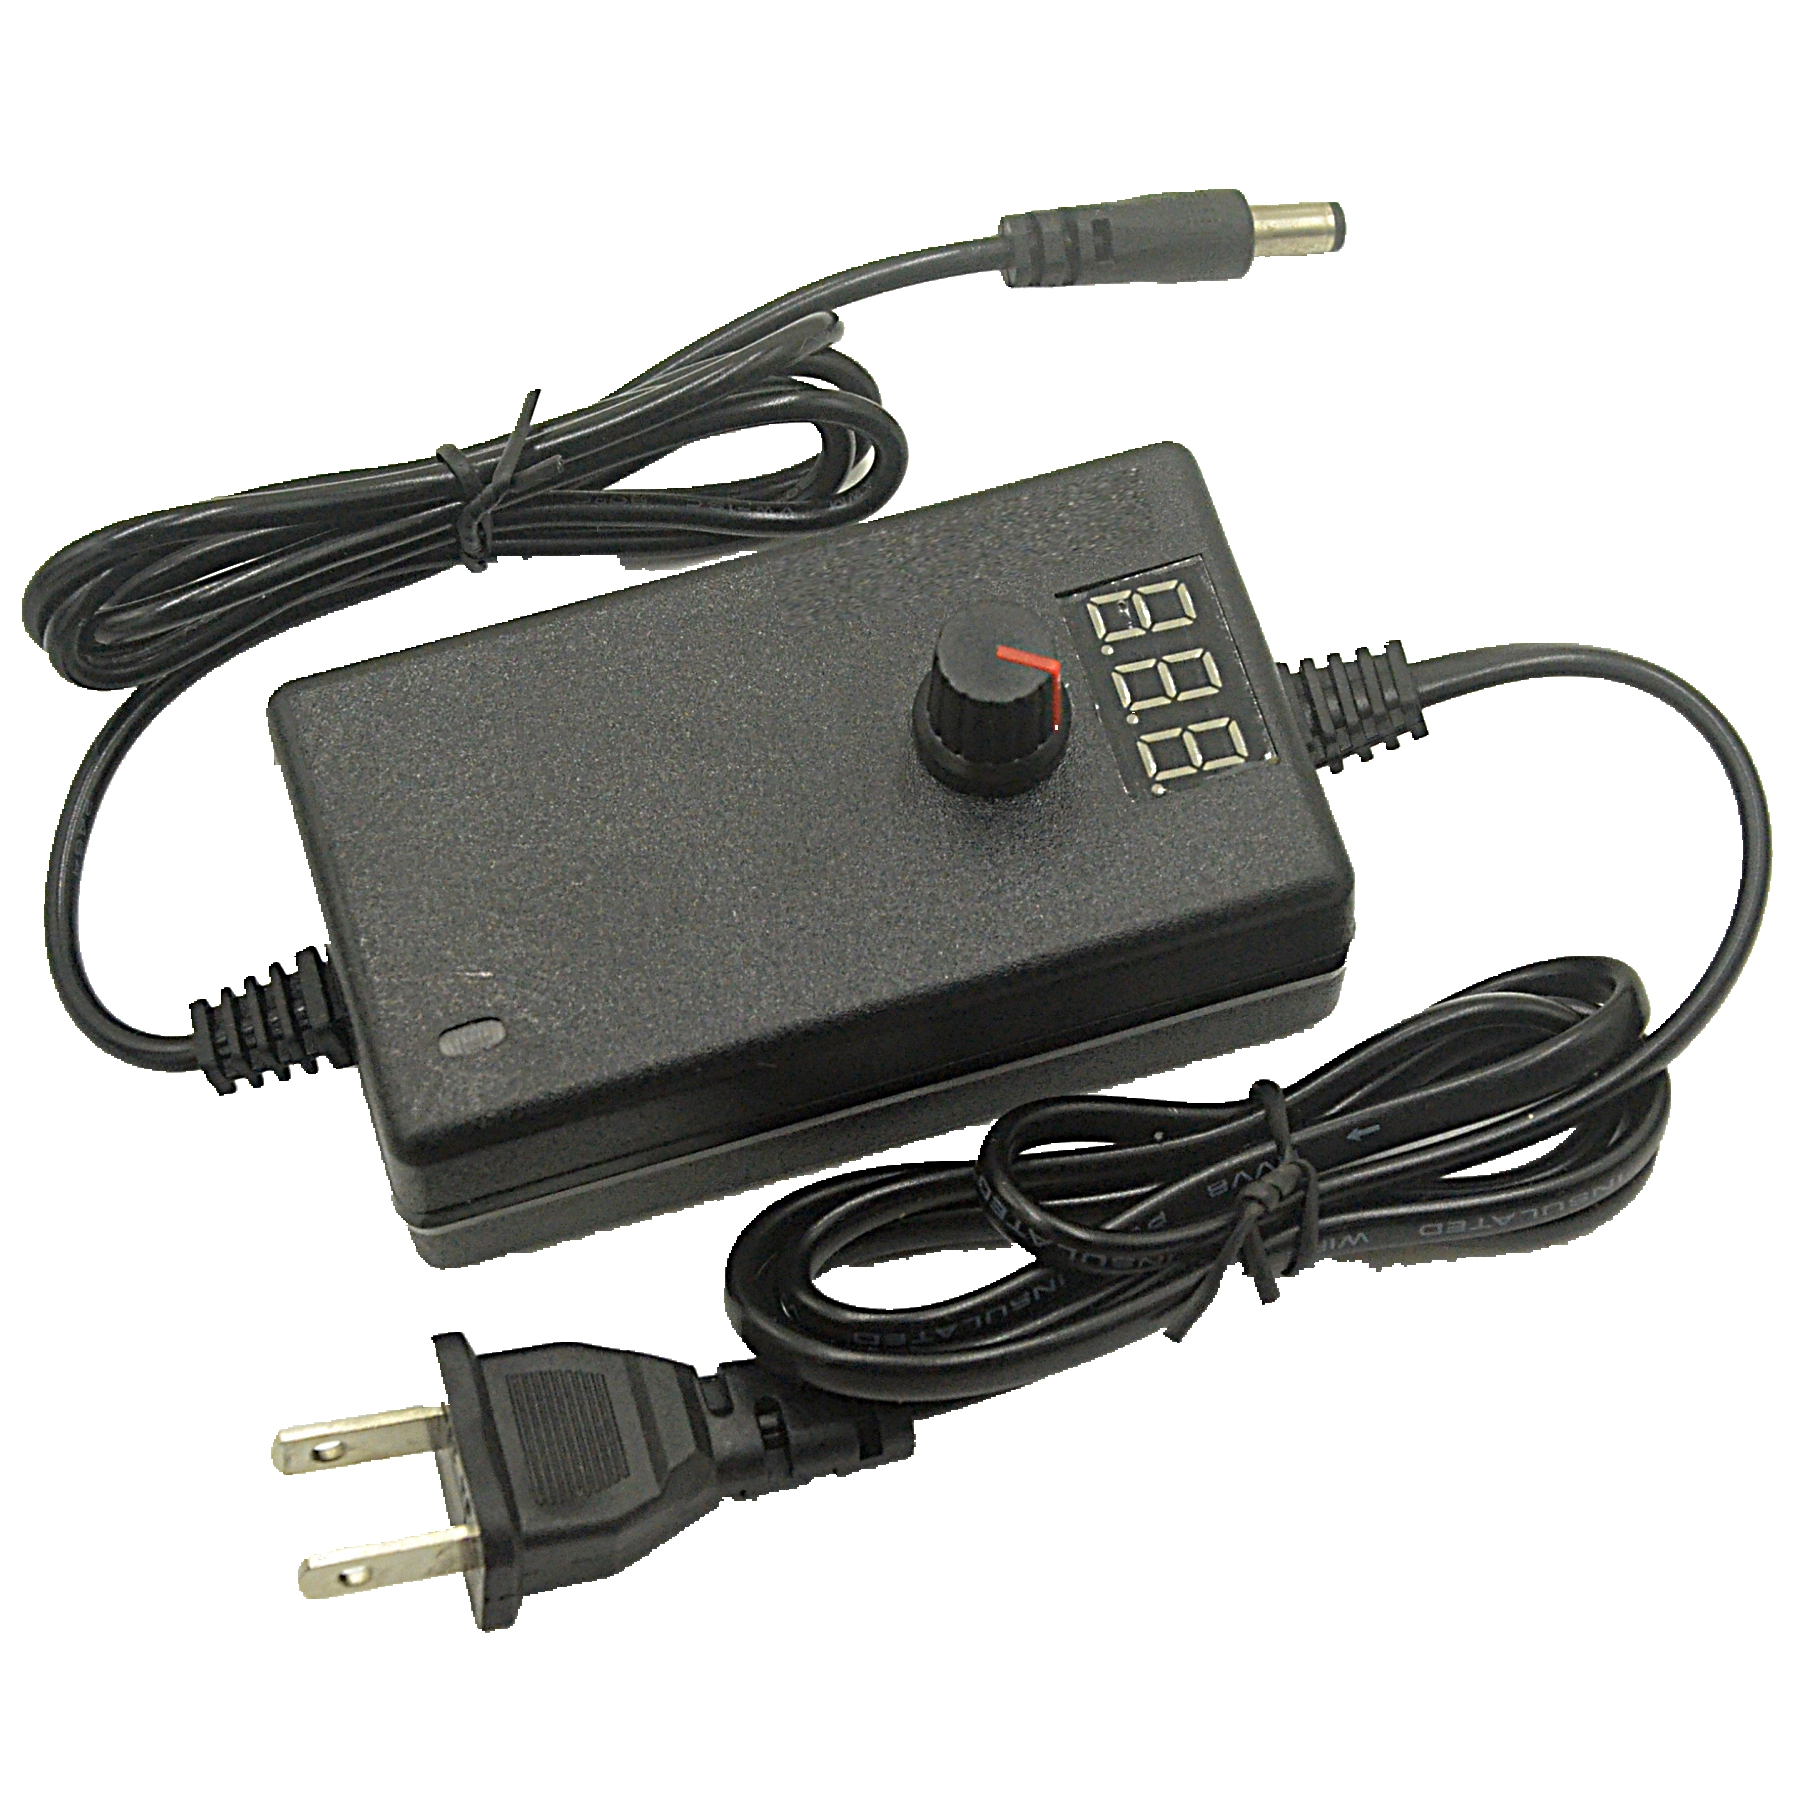 3-12V-3A-Adjustable-Power-Adapter-Stepless-Speed-Voltage-Regulated-Display-Power-Supply-Adapter-1491262-1